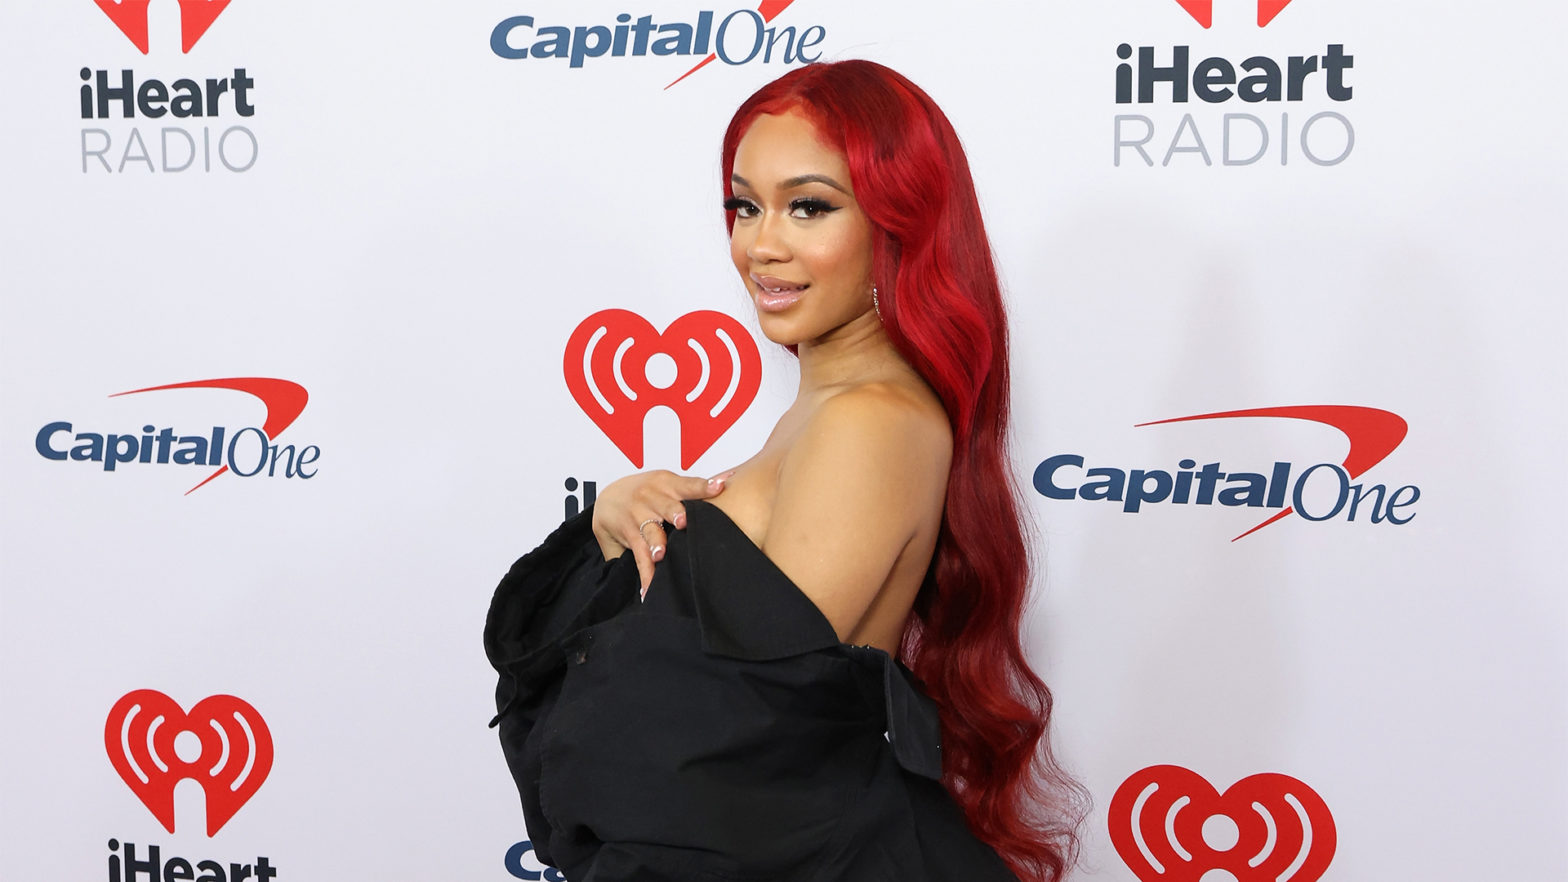 Saweetie To Teach A USC Course Where Students Can Tap In To The Power Of Branding & Marketing